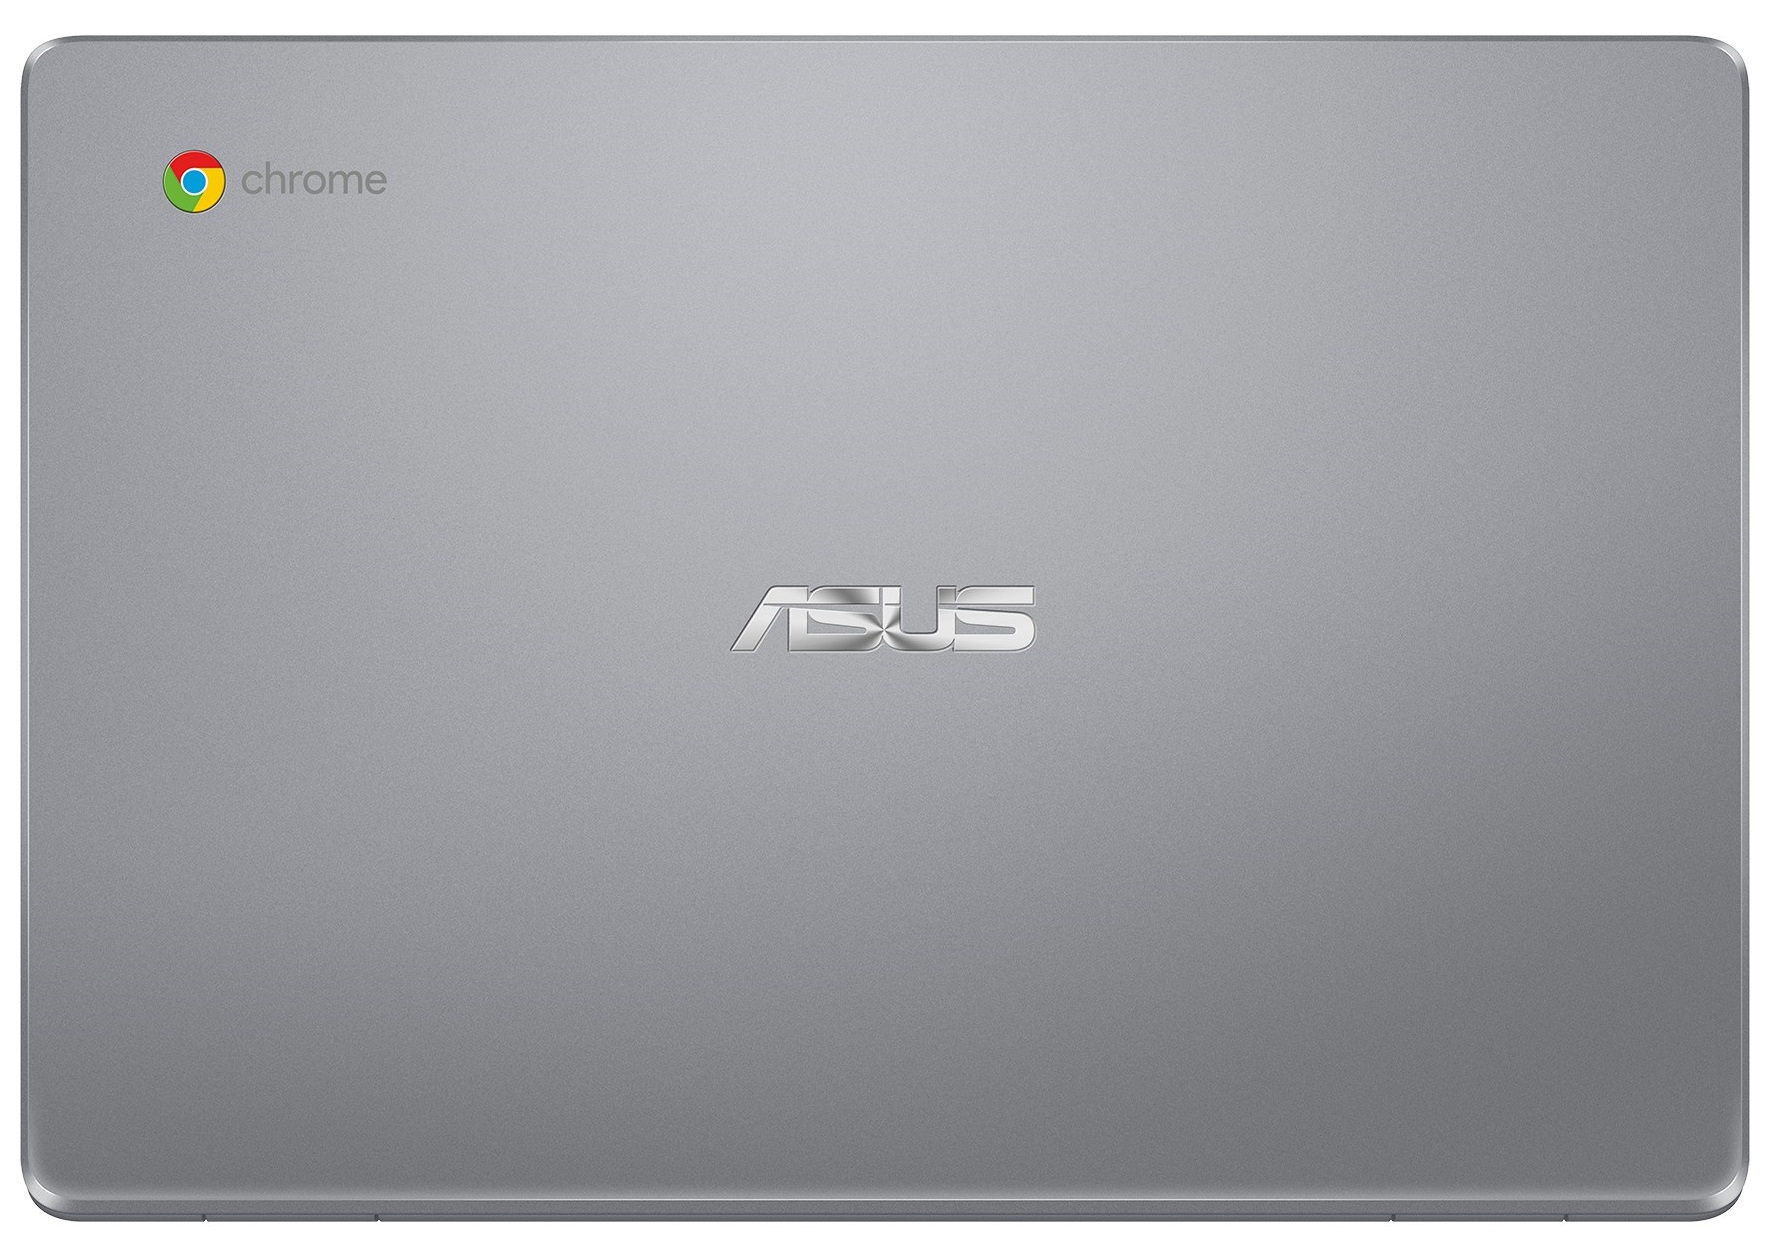 ASUS Chromebook C223 review - uninspiring device with old hardware 